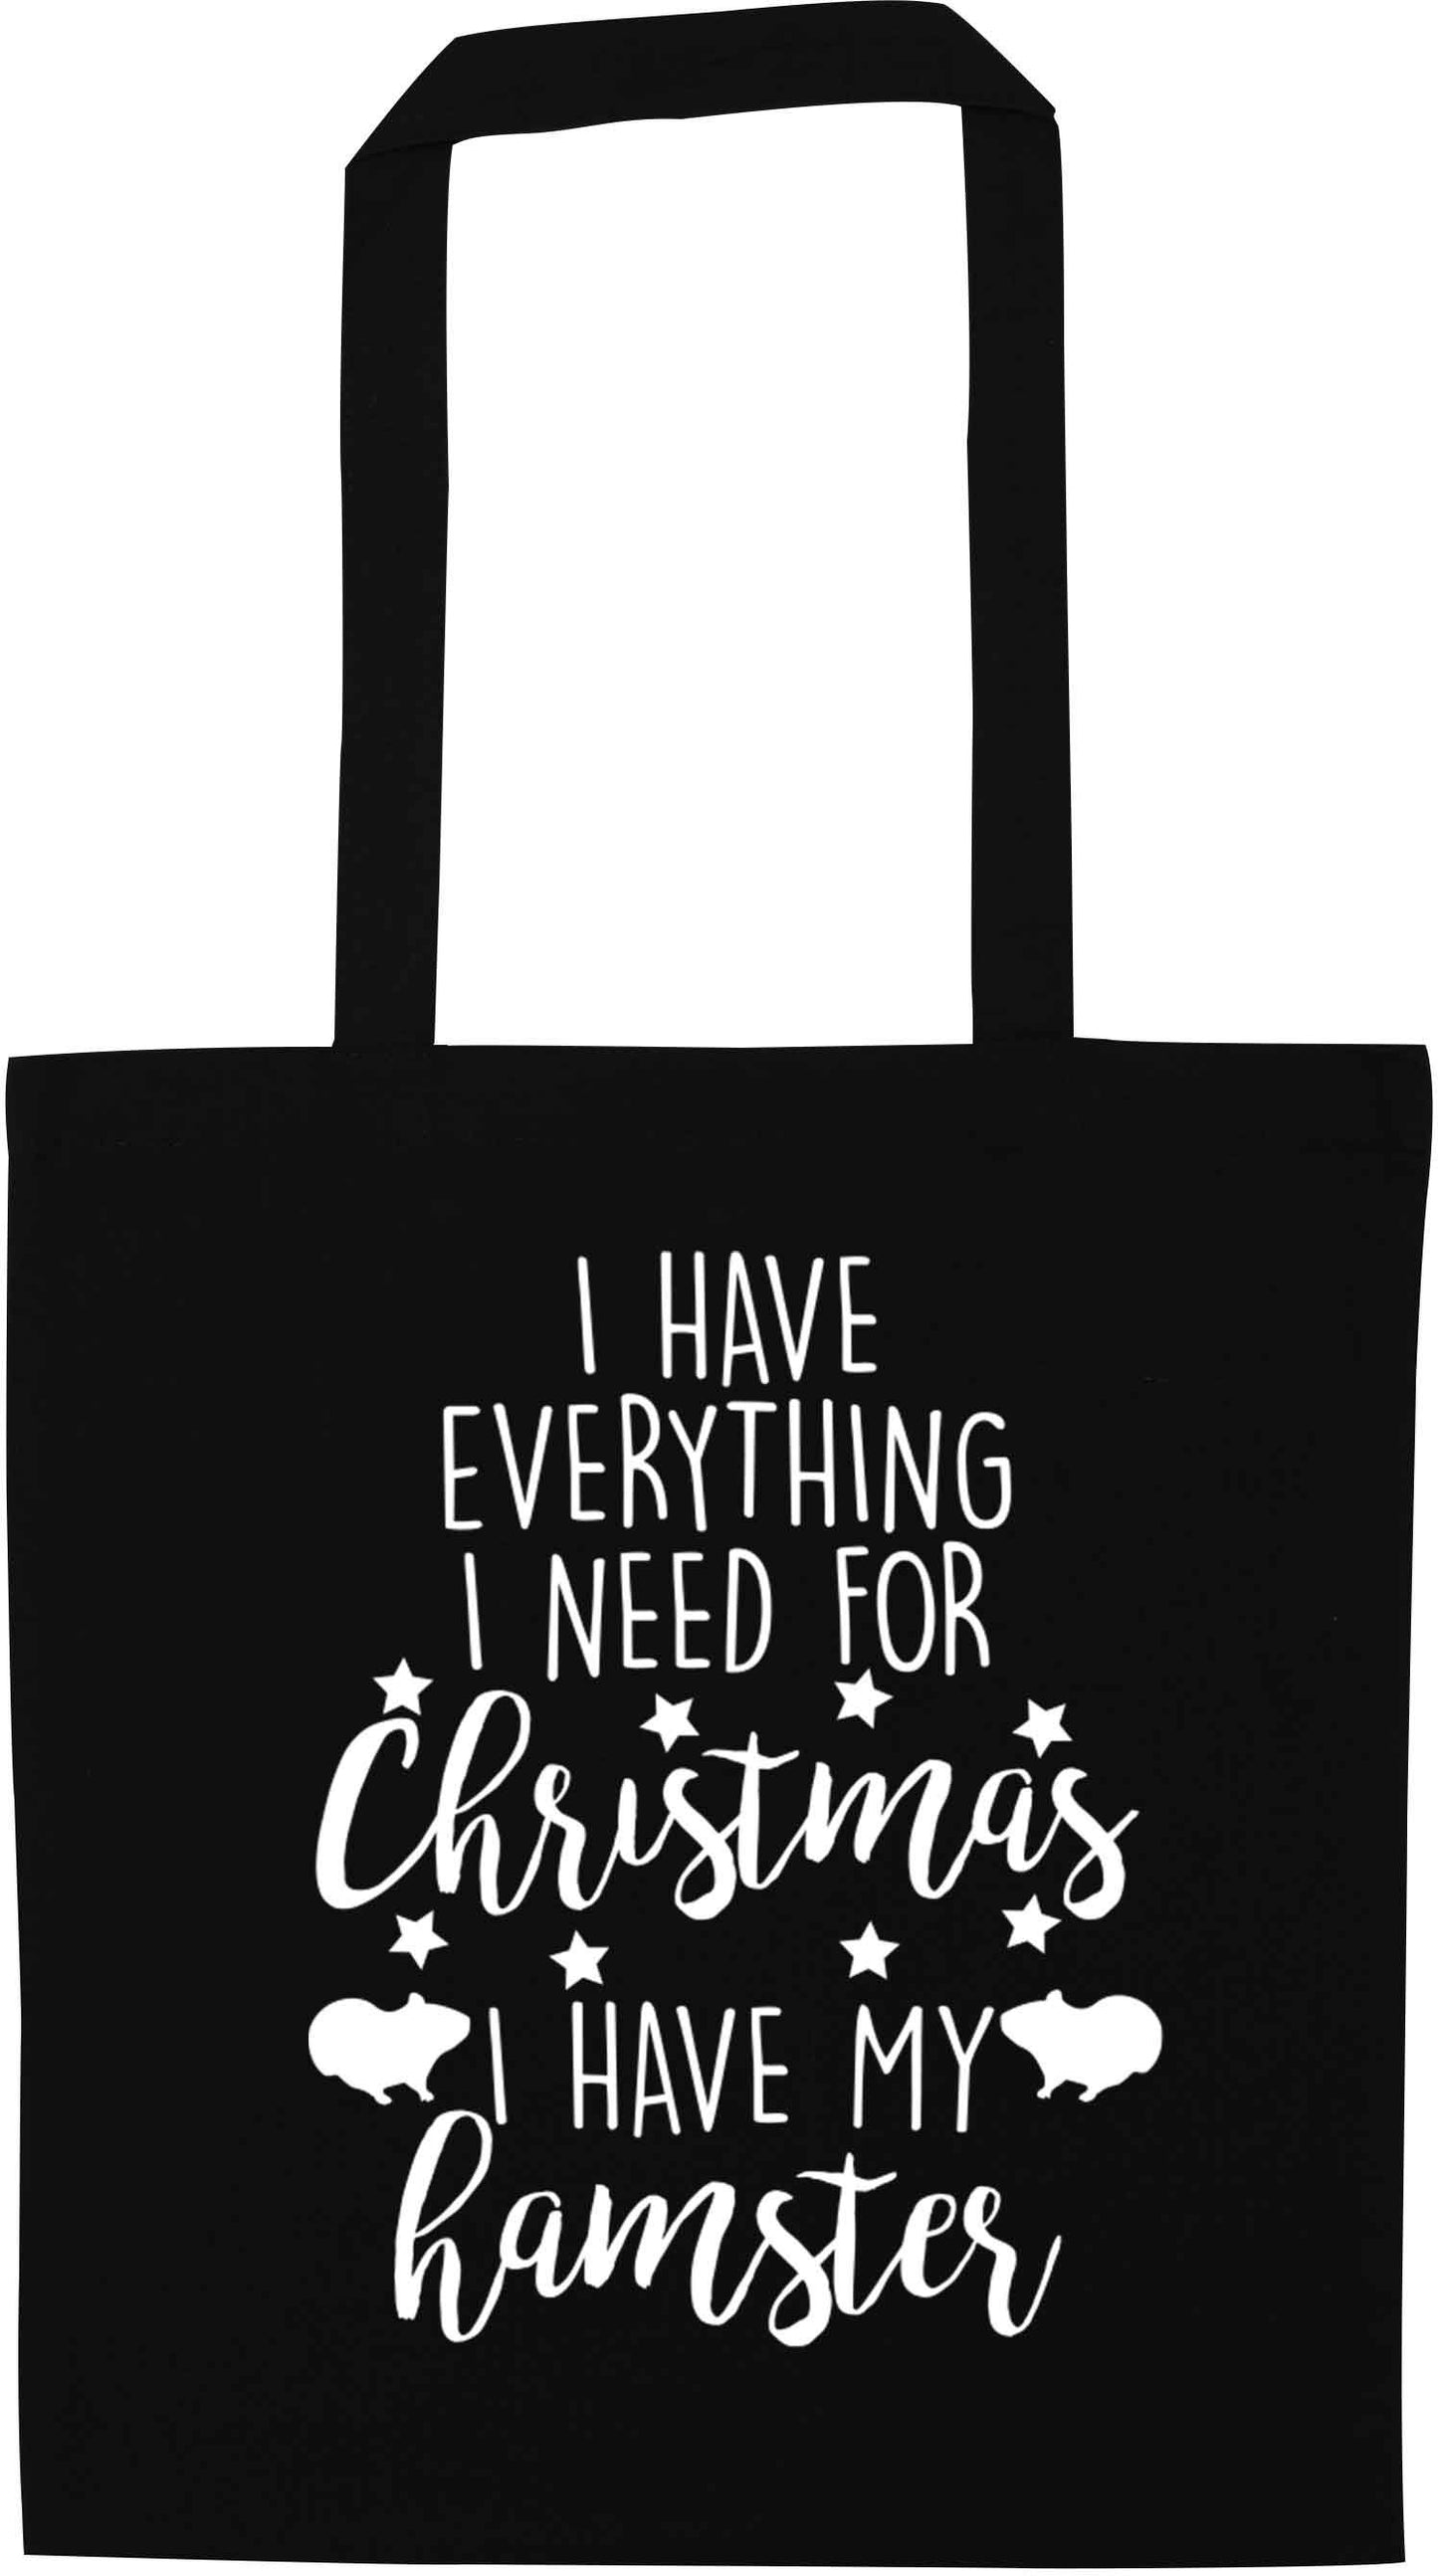 I have everything I need for Christmas I have my hamster black tote bag